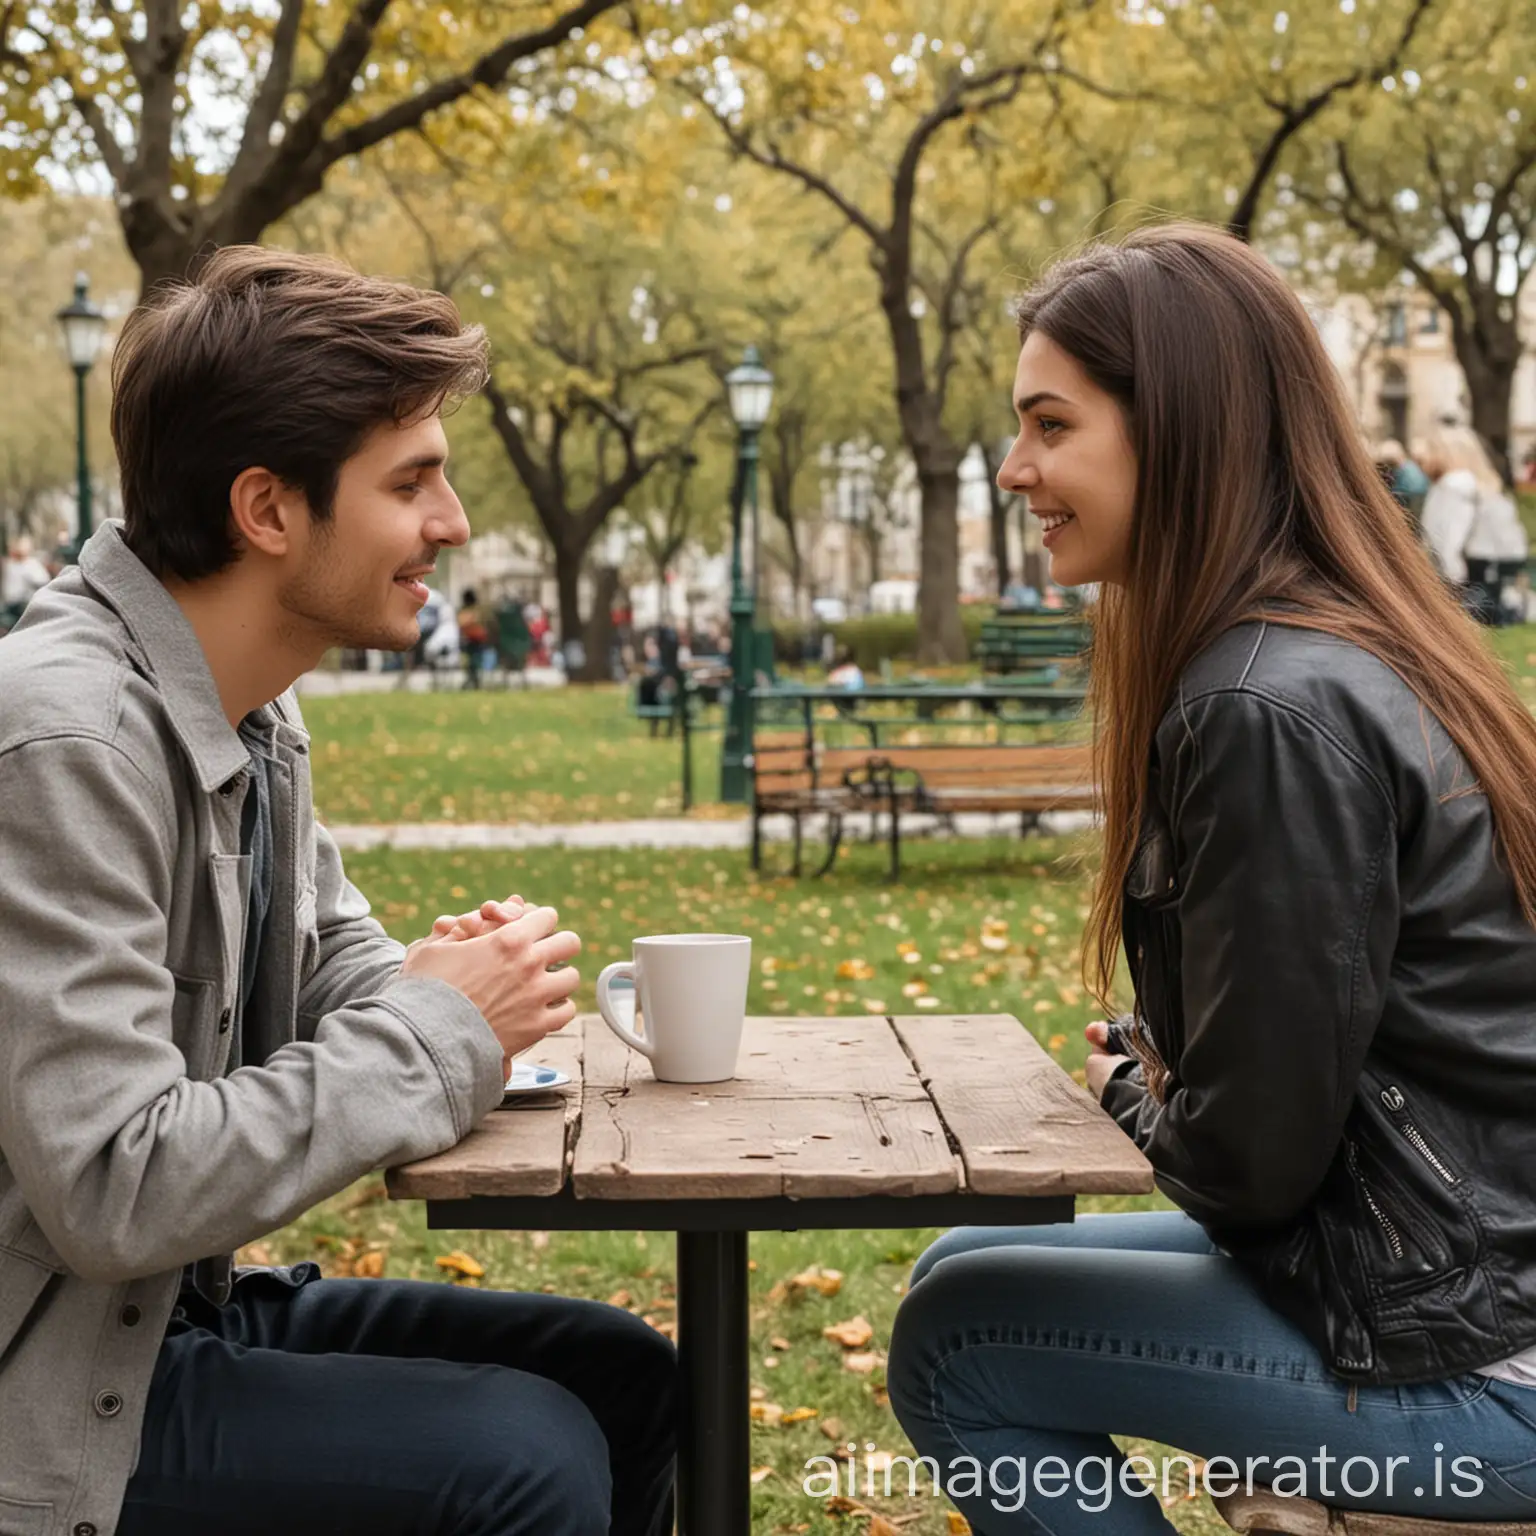 Couple-Sitting-Face-to-Face-Conversing-in-Park-Setting